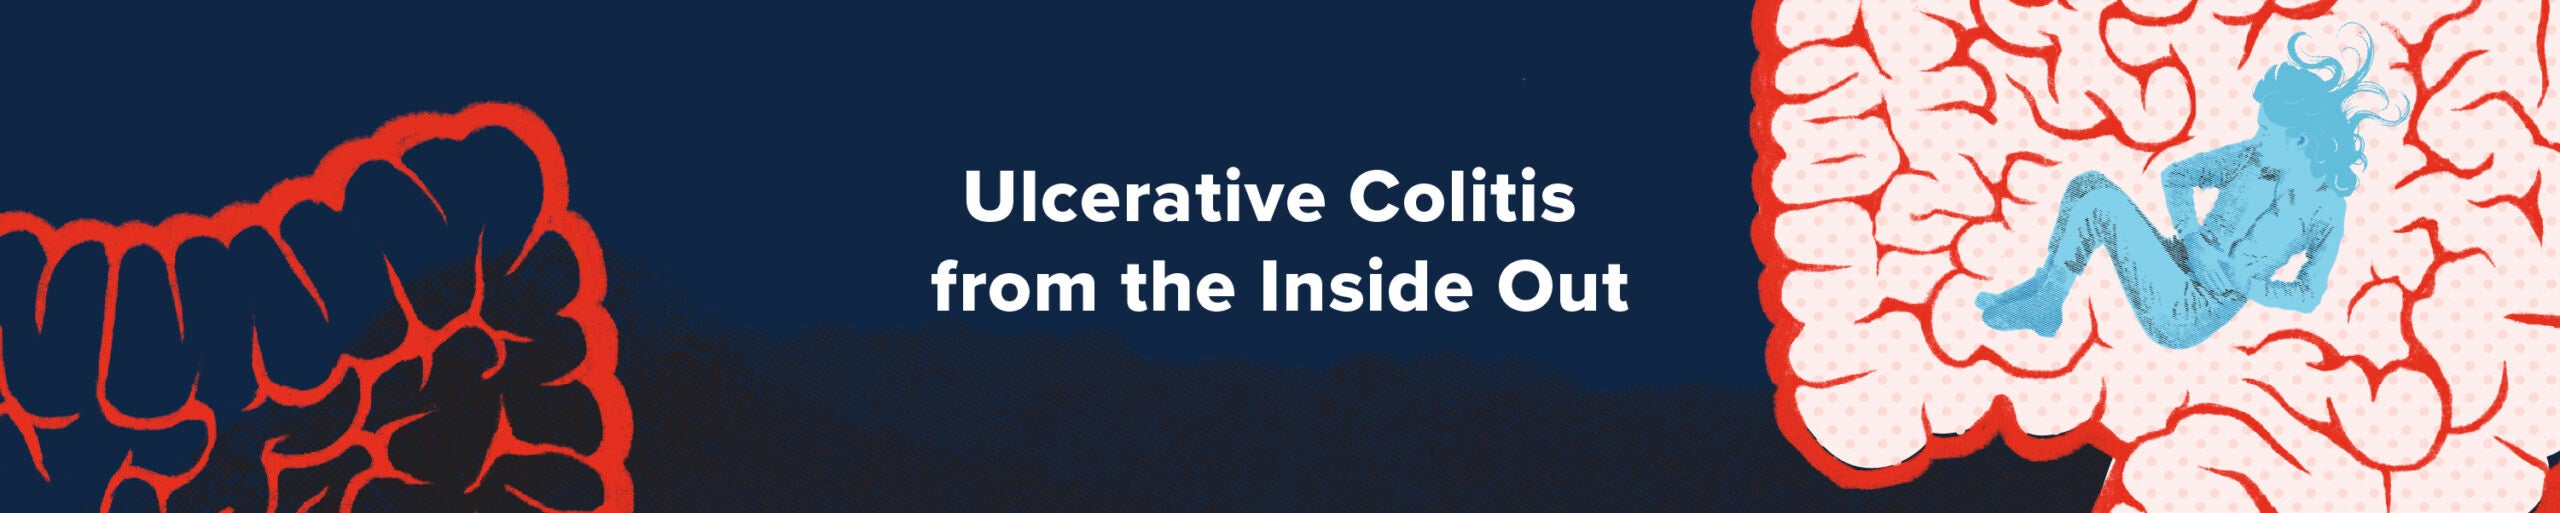 Ulcerative Colitis from the Inside Out